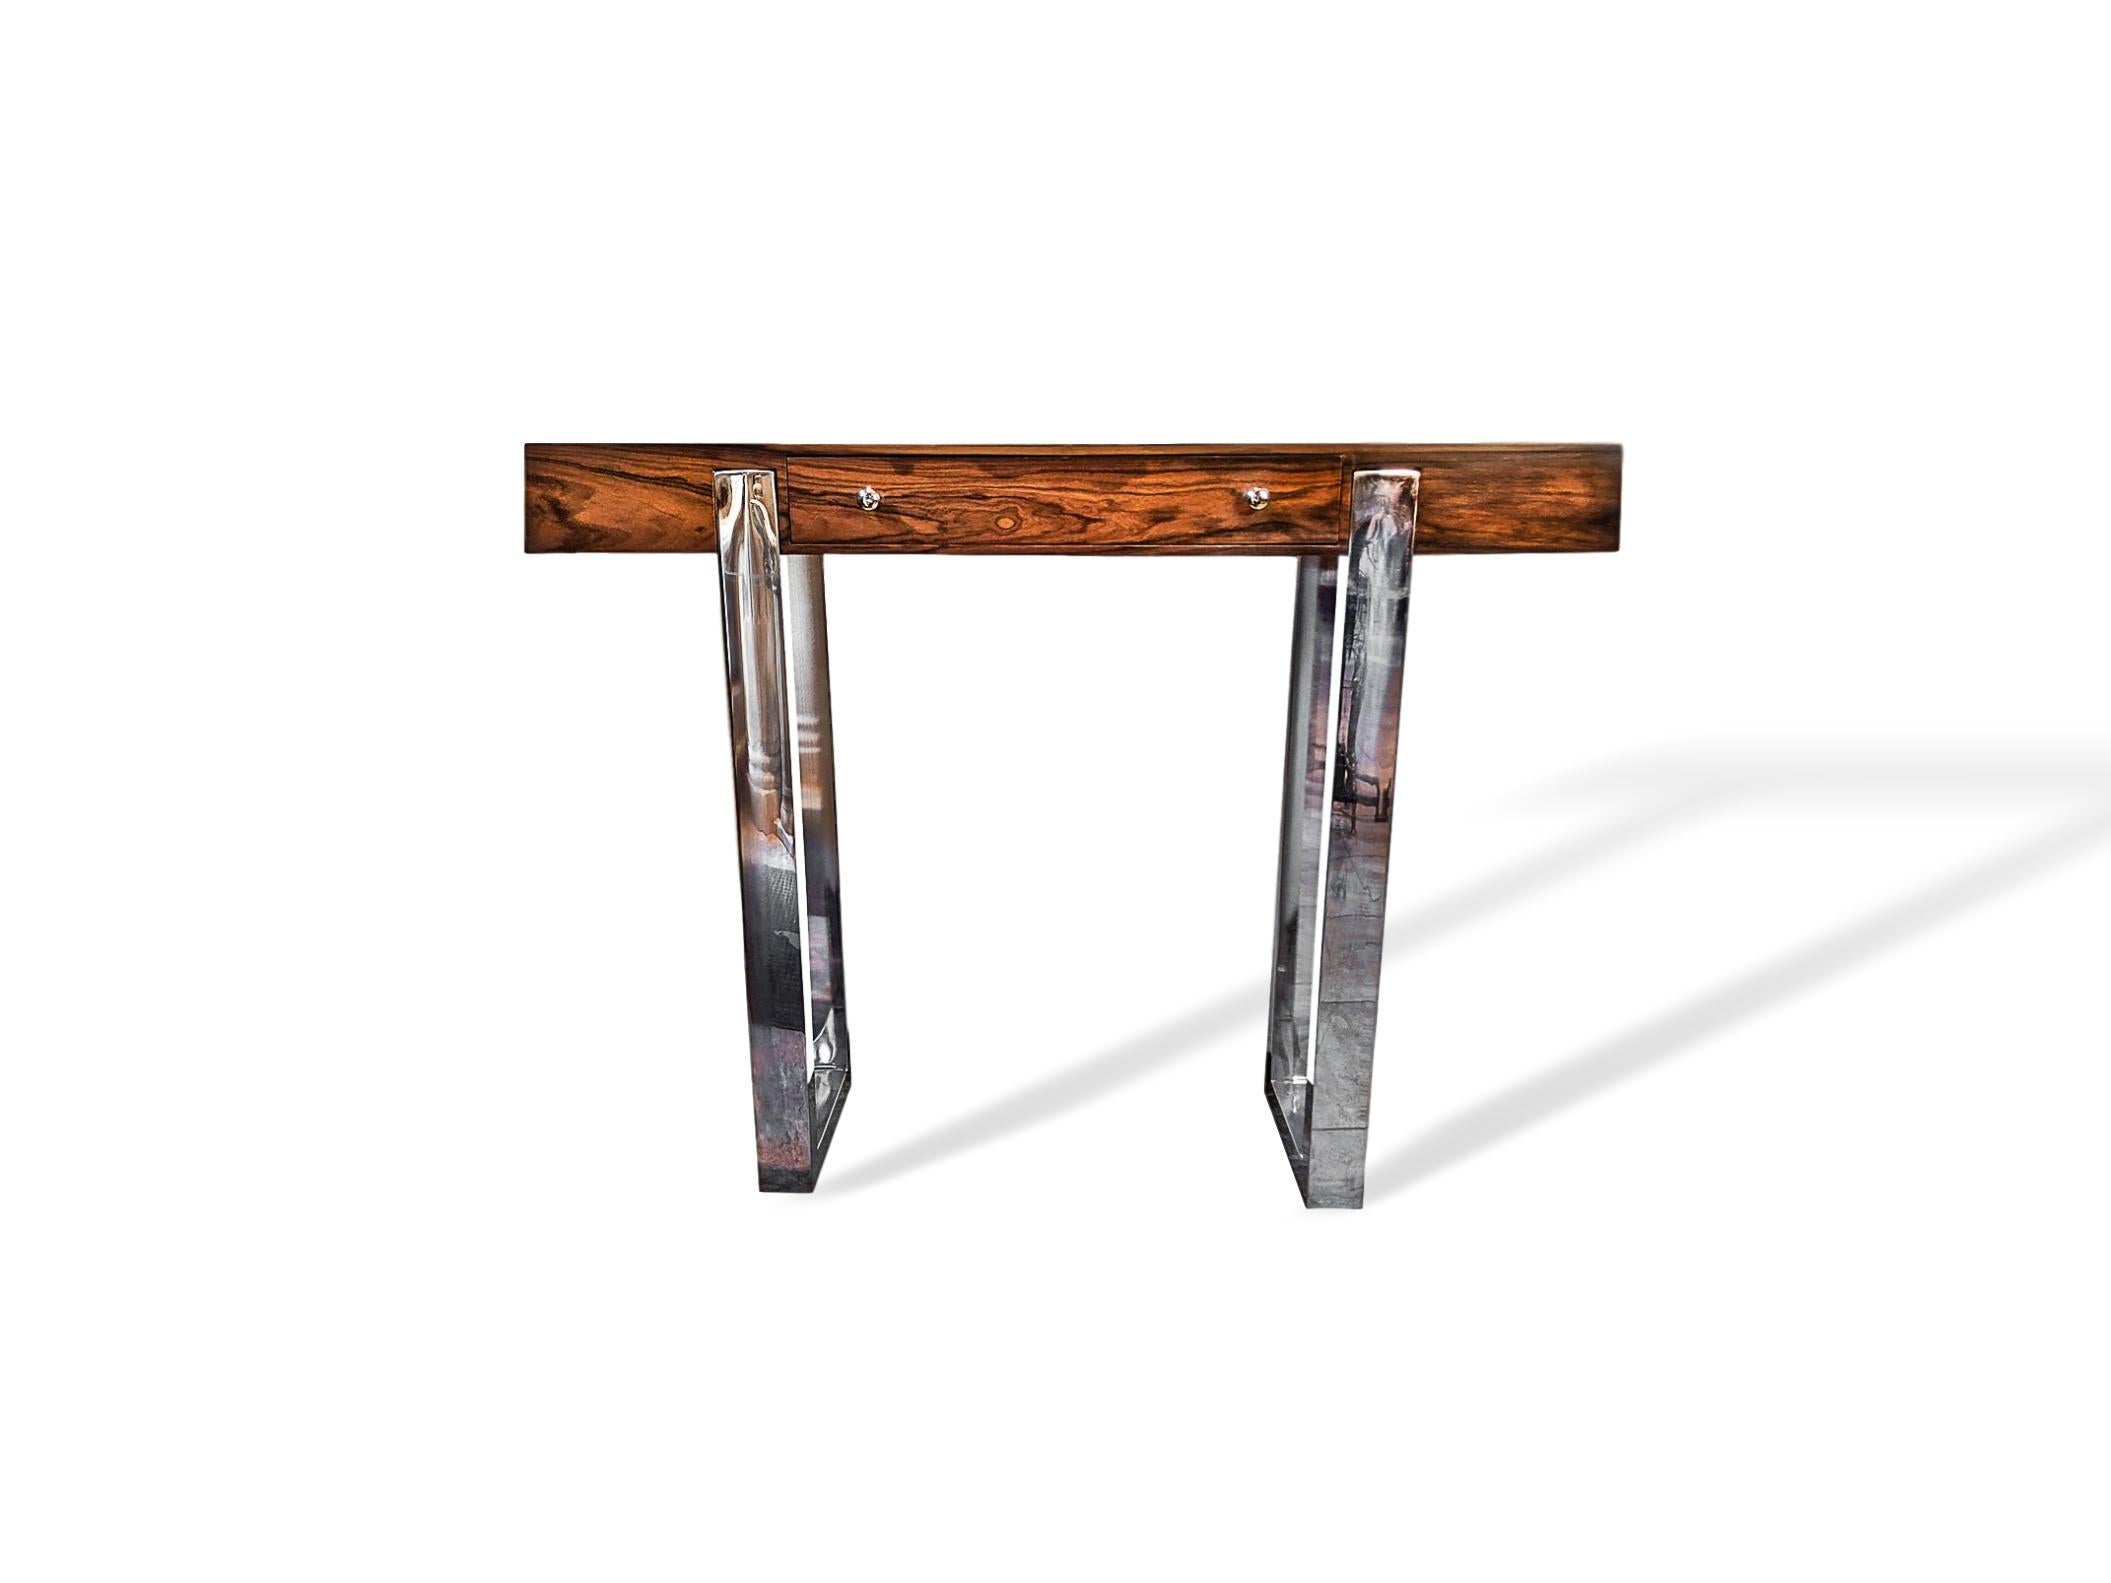 Pair of Mid-Century Modern rosewood and chrome console tables, Italian, circa 1965, each with a single freeze drawer. Highly desirable size and beautifully finished on all sides, so the pieces can float in the room. A rare and beautiful pair of the